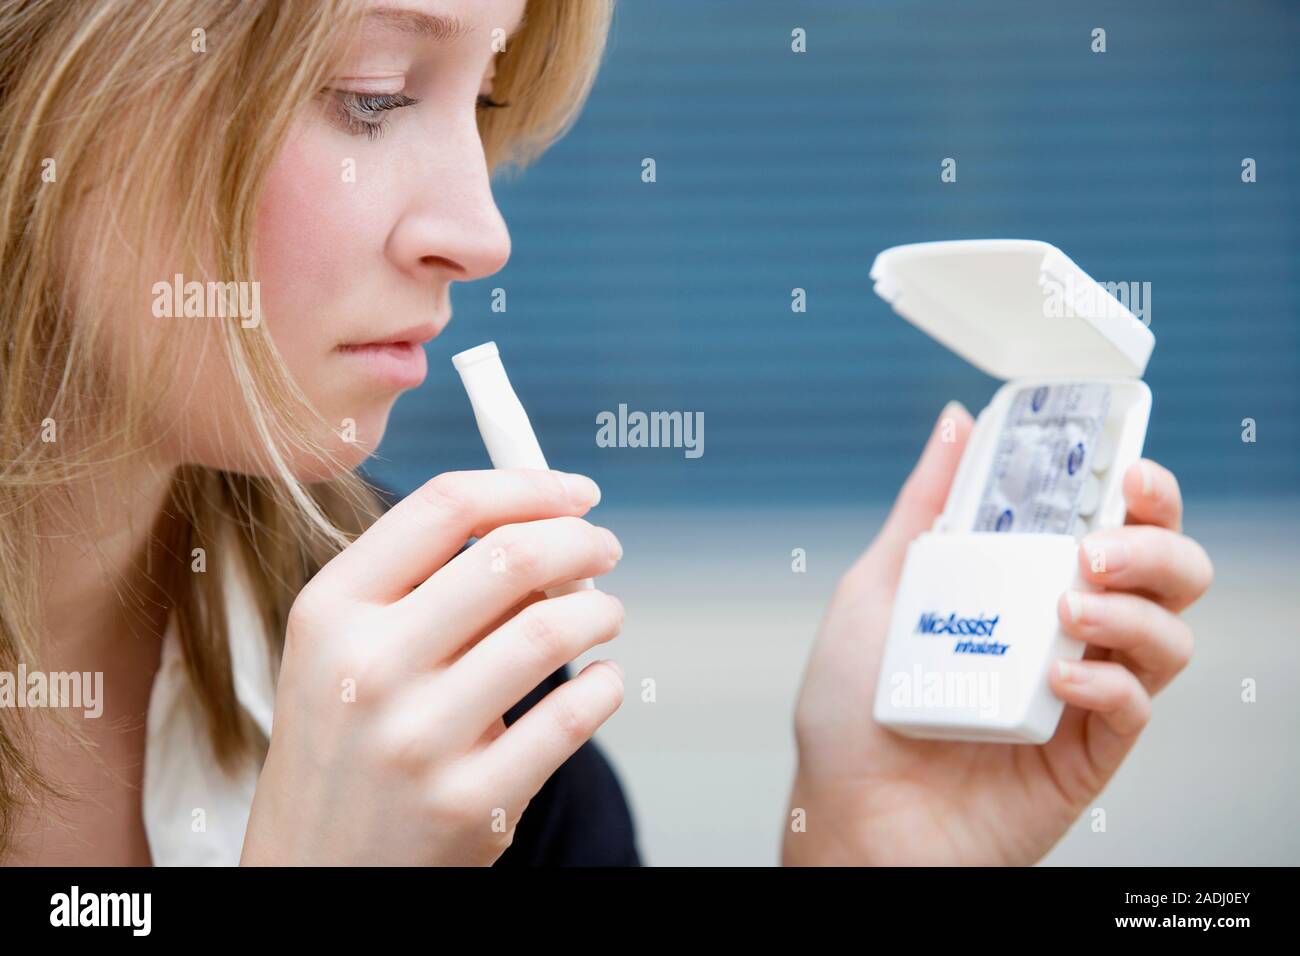 MODEL RELEASED. Nicotine inhalator. Woman using a nicotine inhaler to help her quit smoking. This is the NicAssist inhalator marketed by Boots with ca Stock Photo